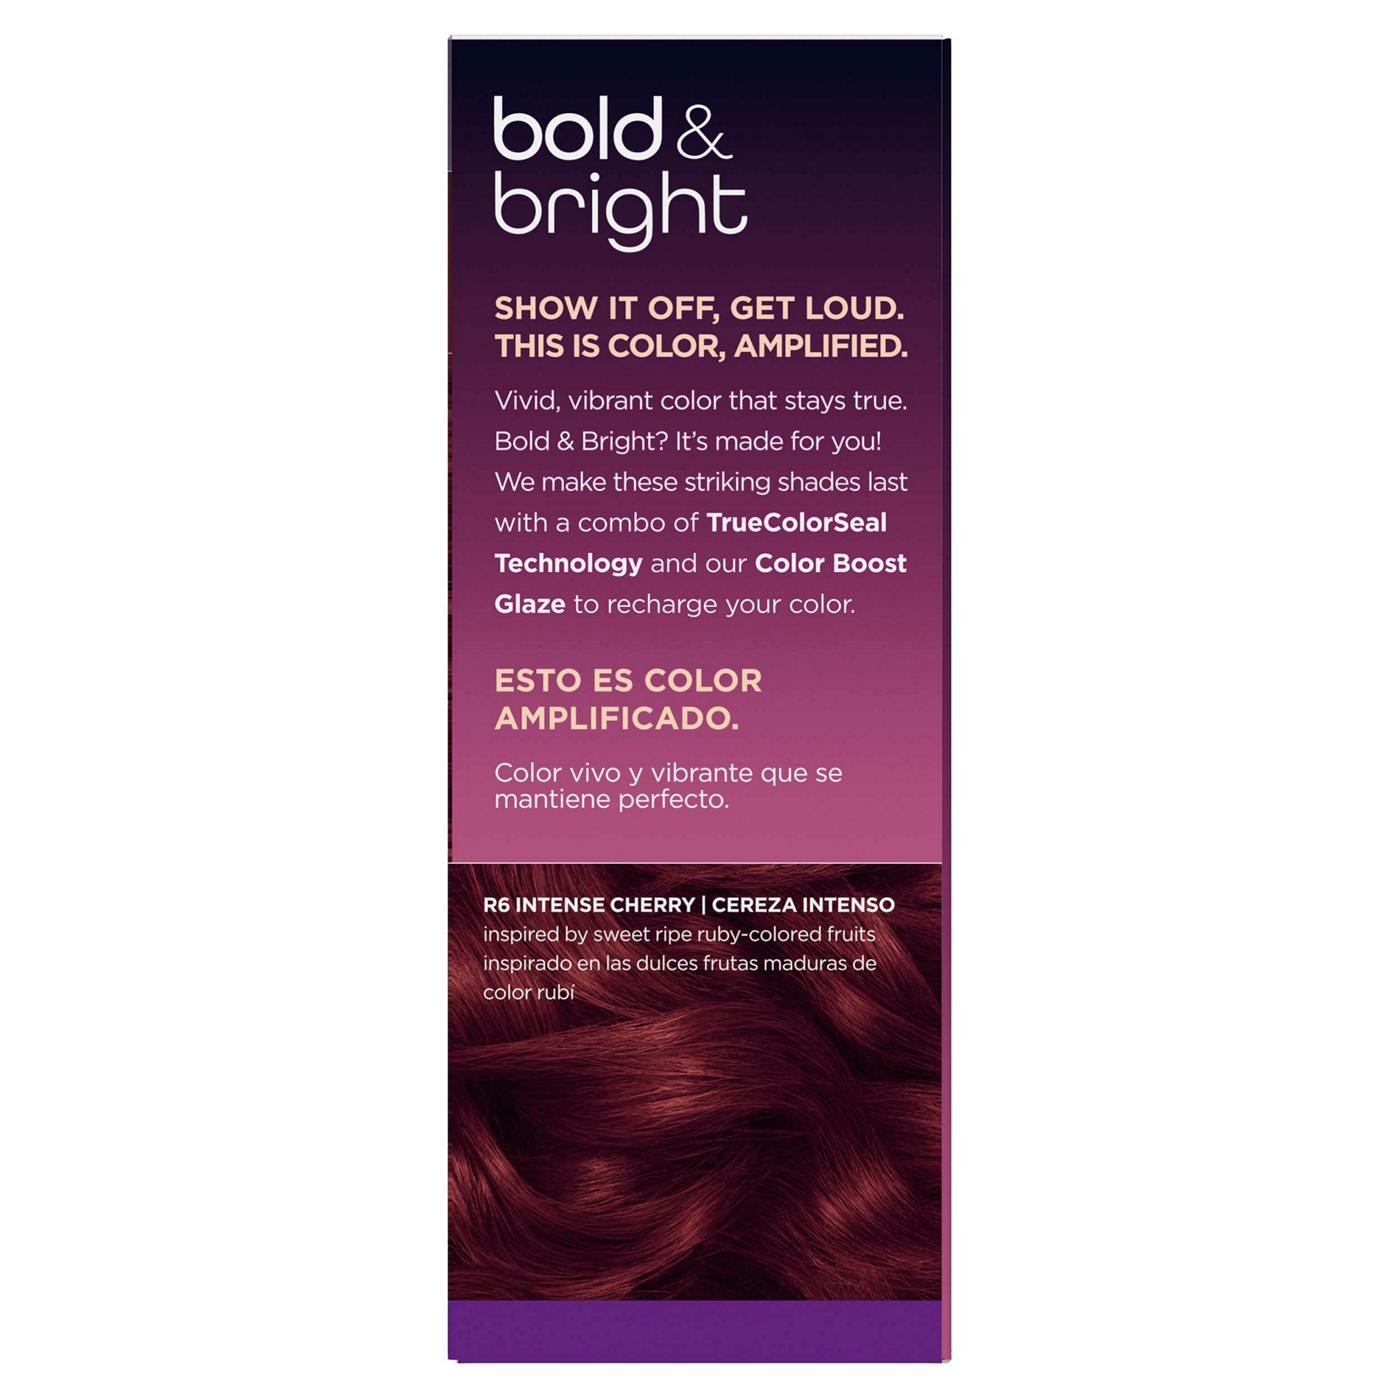 Clairol Bold & Bright Permanent Hair Color - R6 Intense Cherry; image 9 of 11